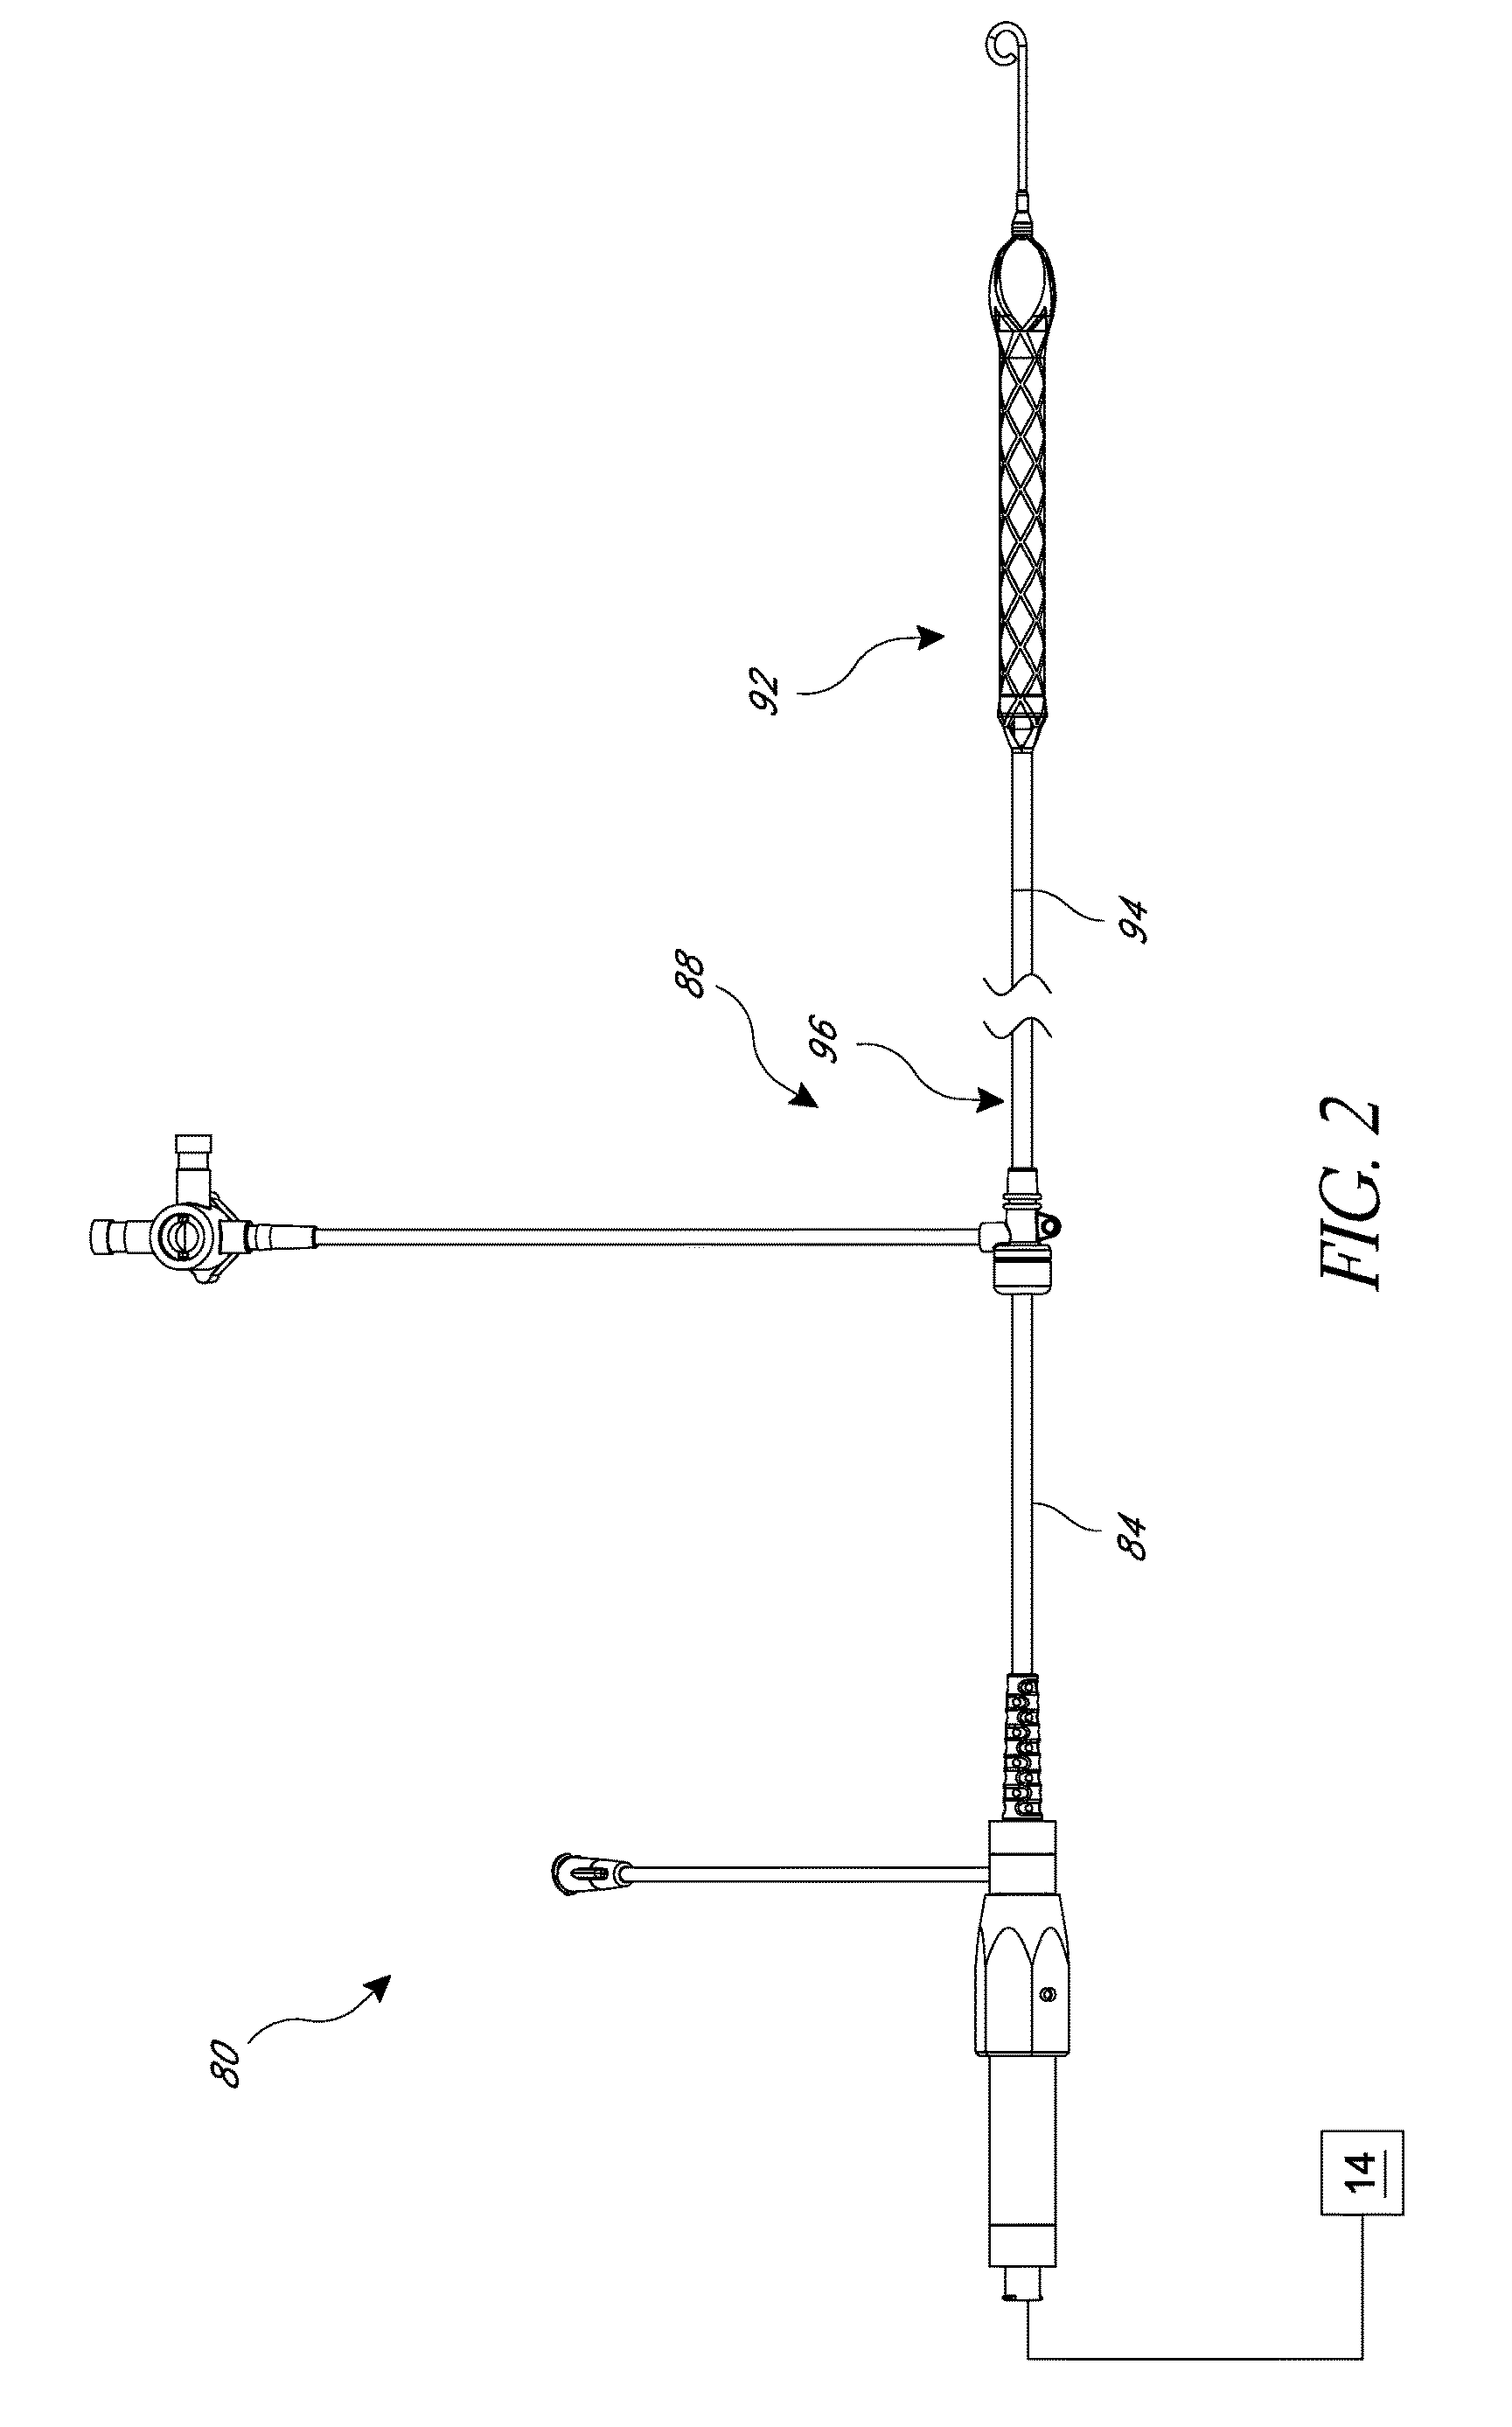 Catheter pump with off-set motor position